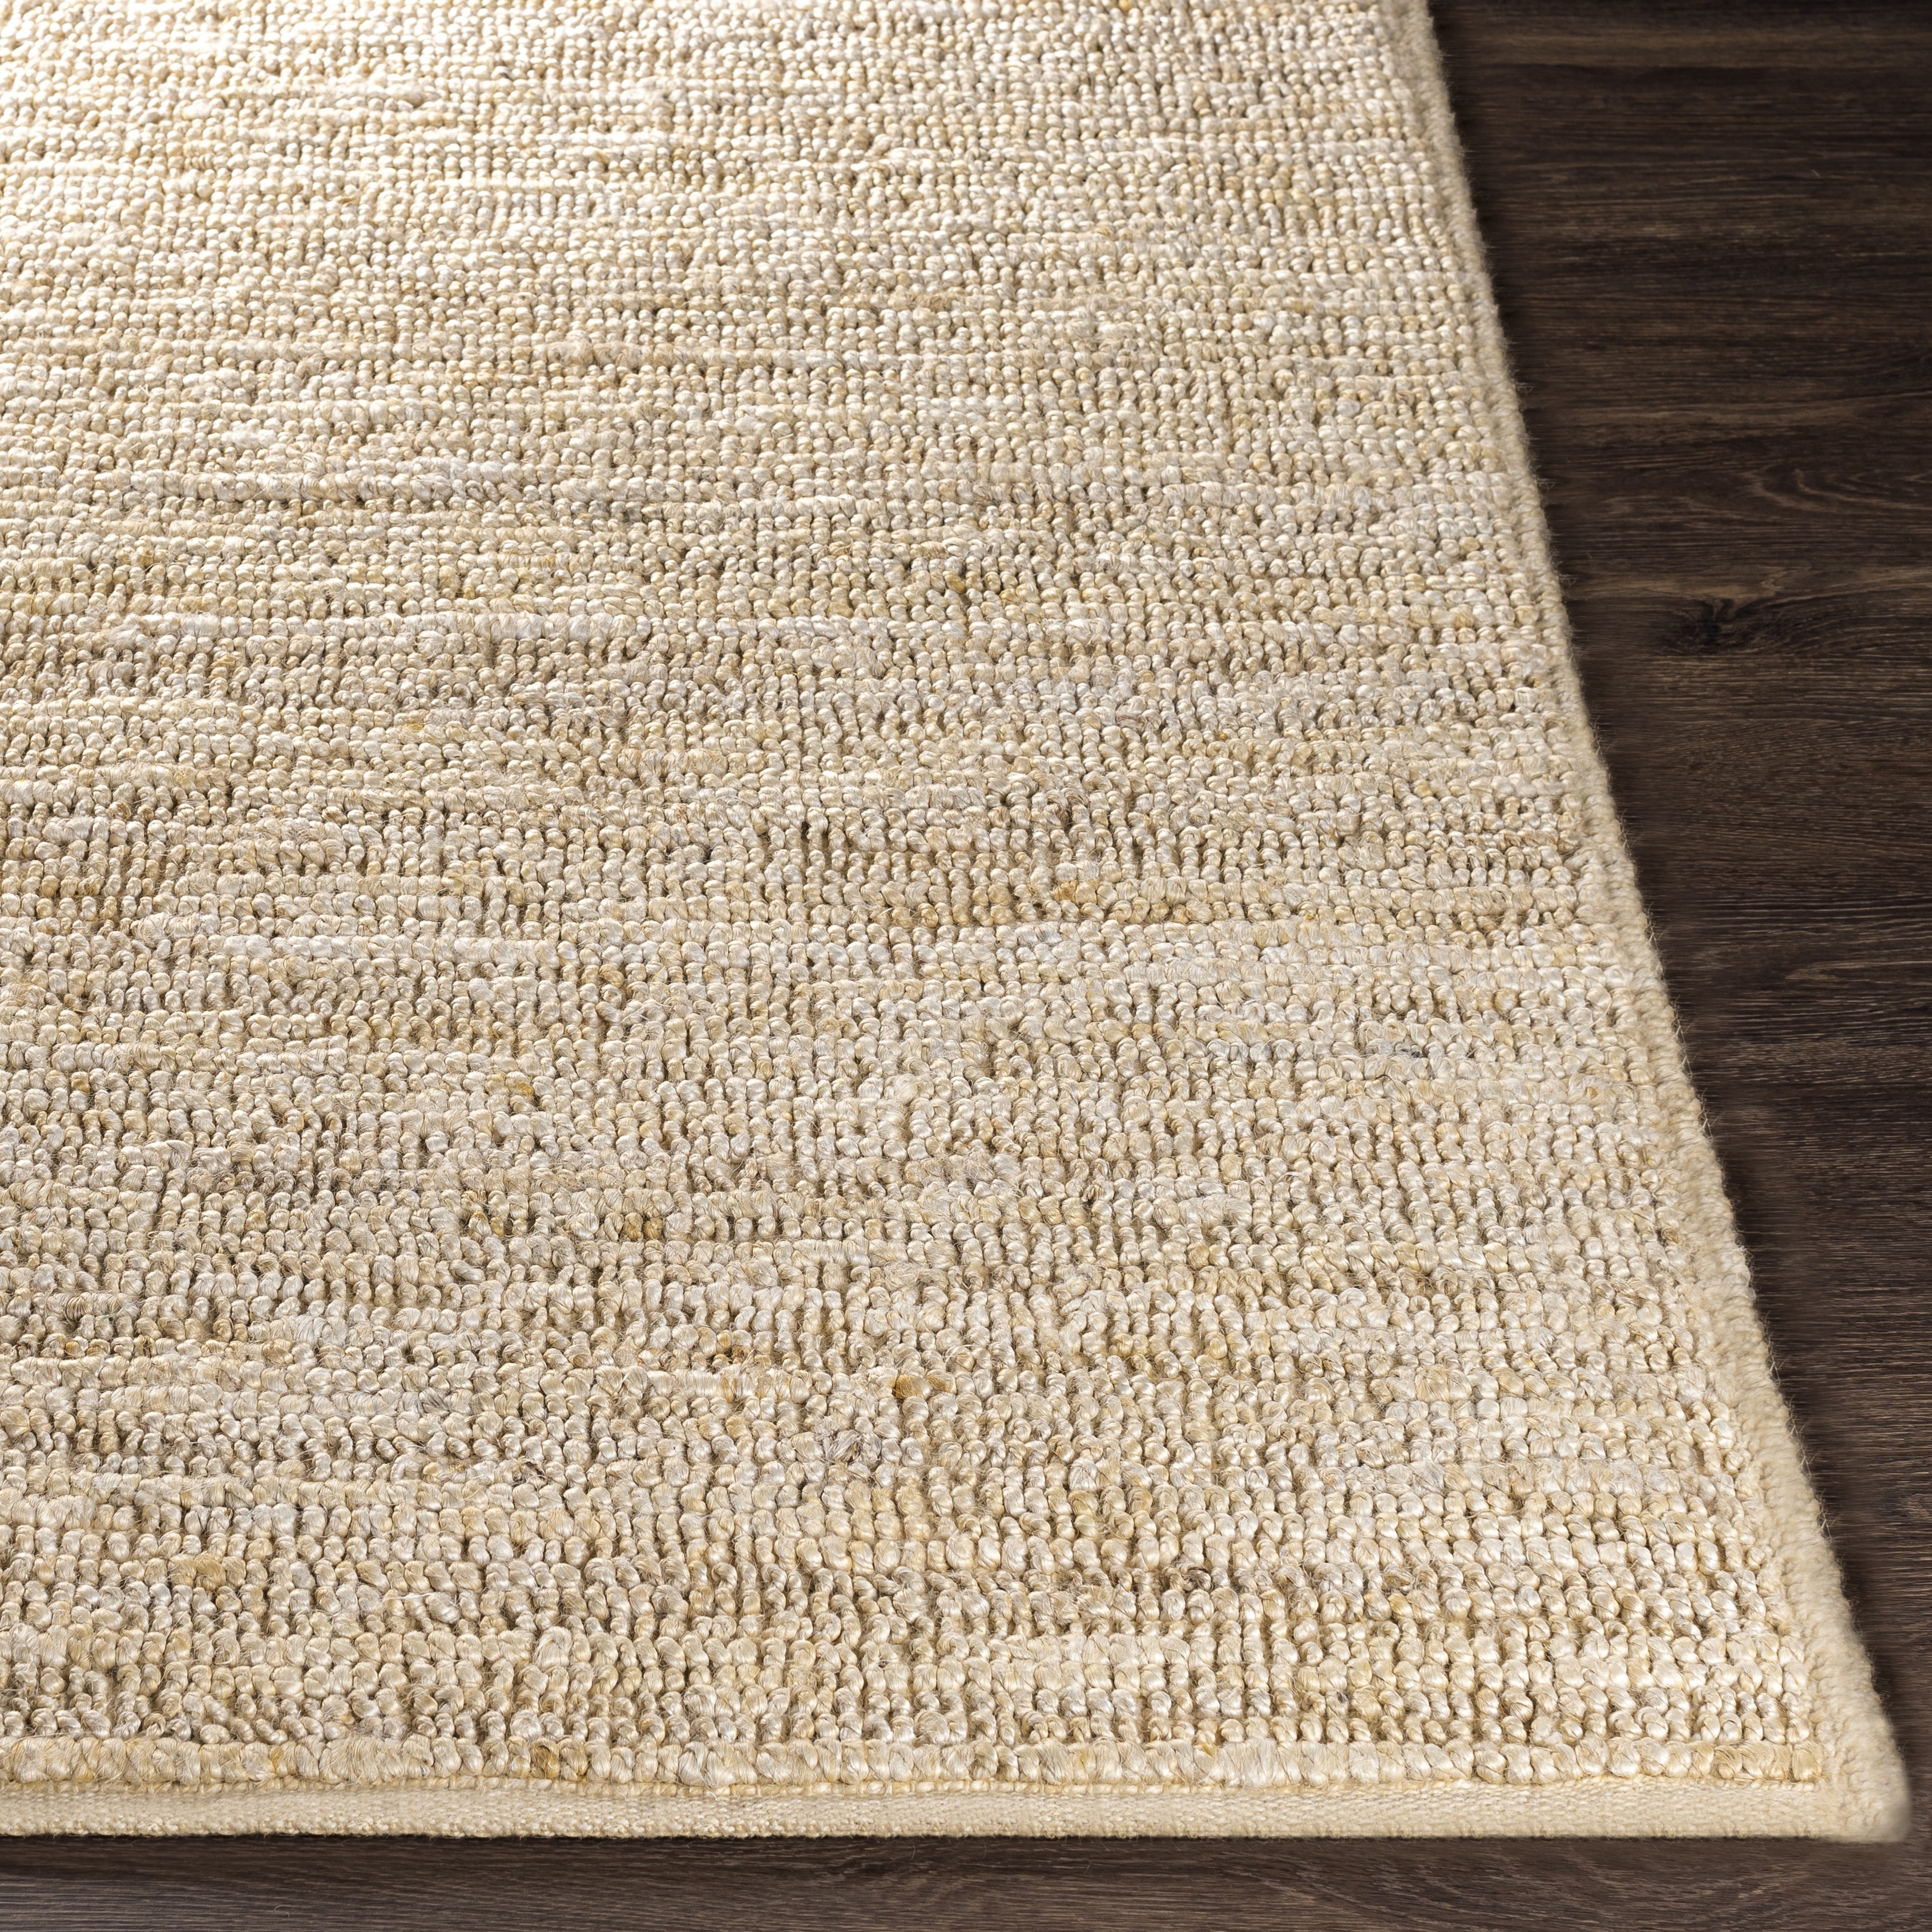 Continental Rug, 3'6" x 5'6" - Image 2